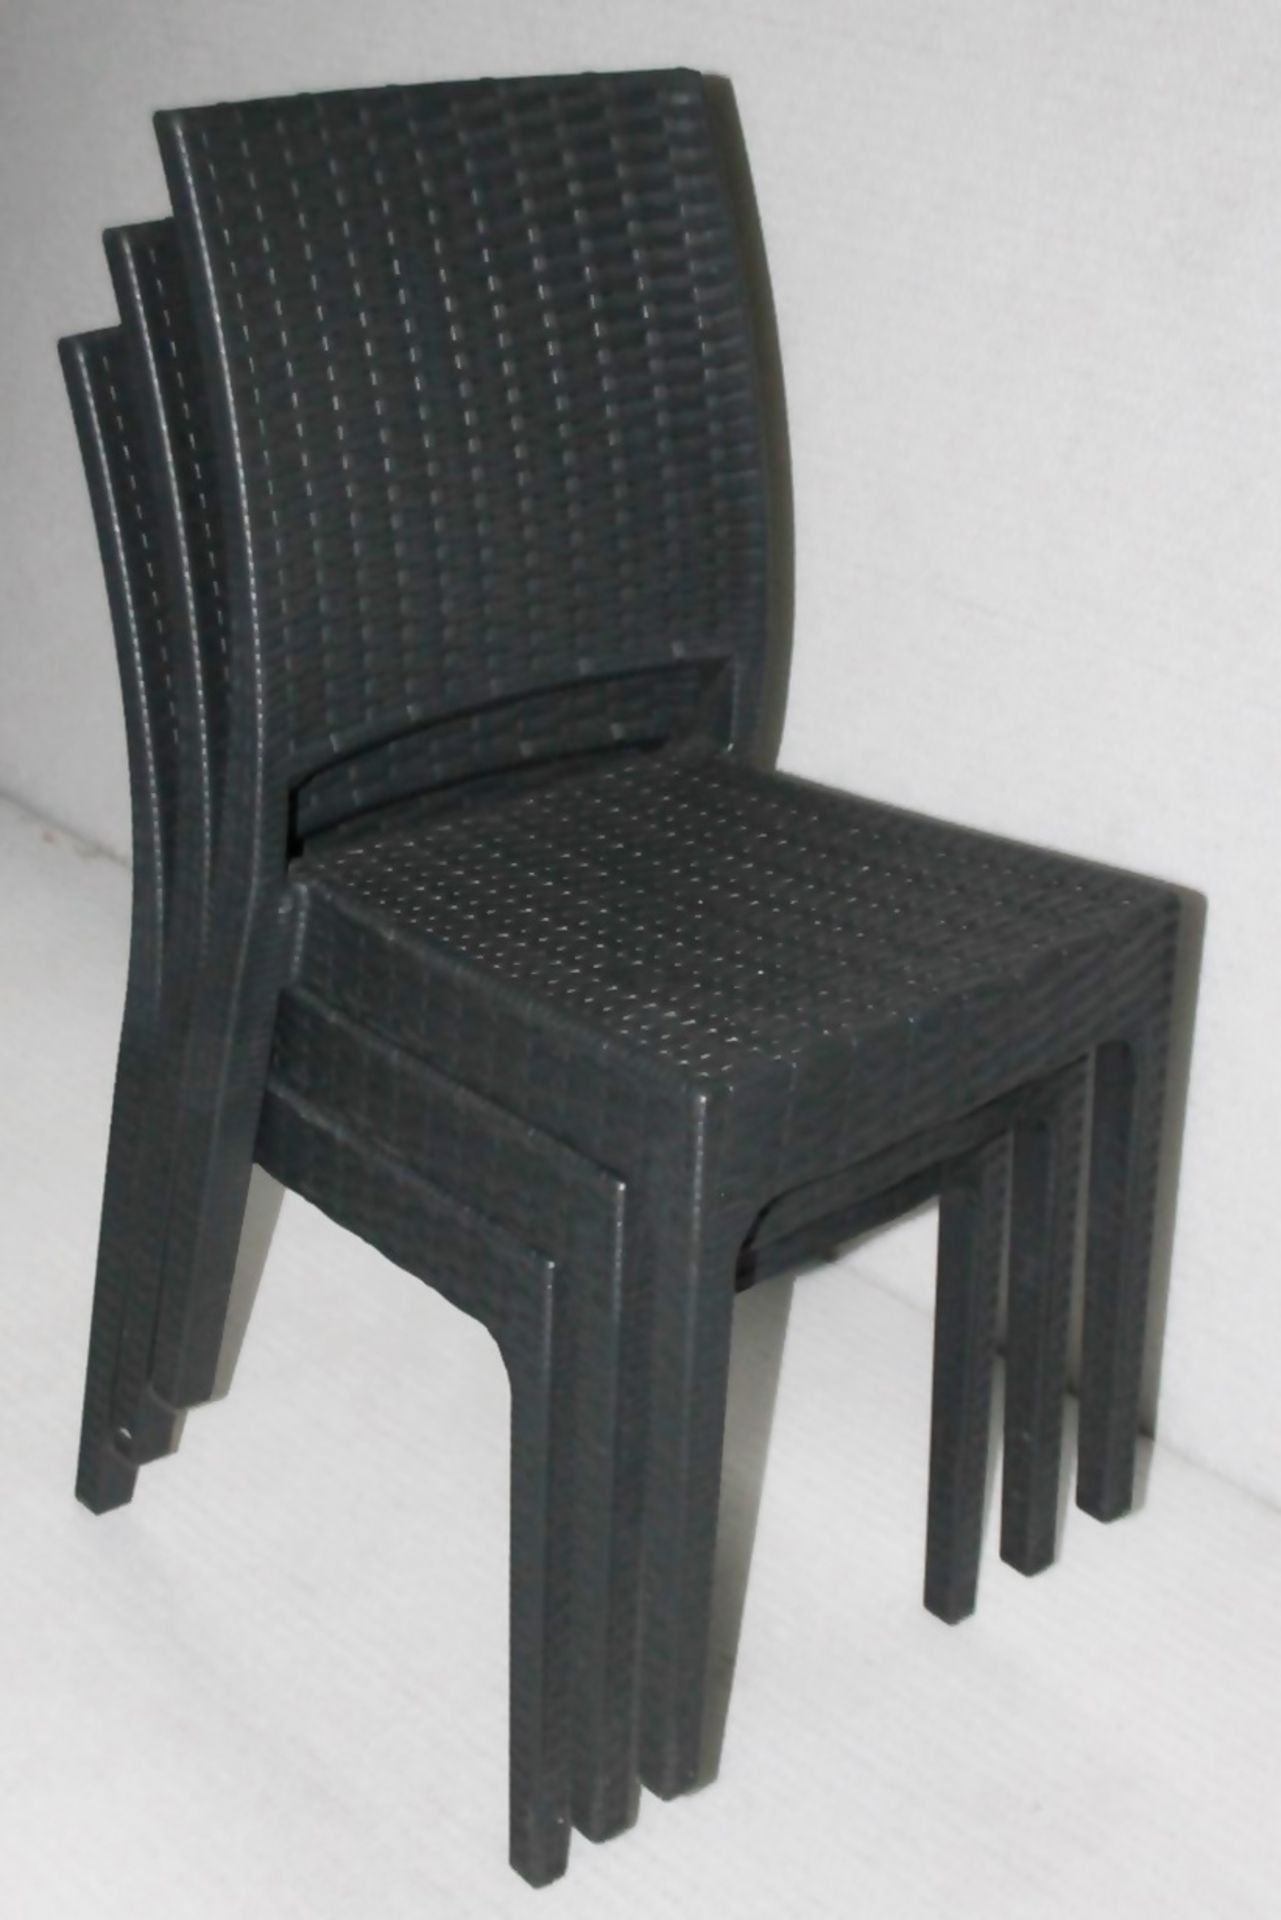 4 x Siesta 'Florida' Rattan Style Garden Chairs In Dark Grey - Suitable For Commercial or Home Use - - Image 4 of 14